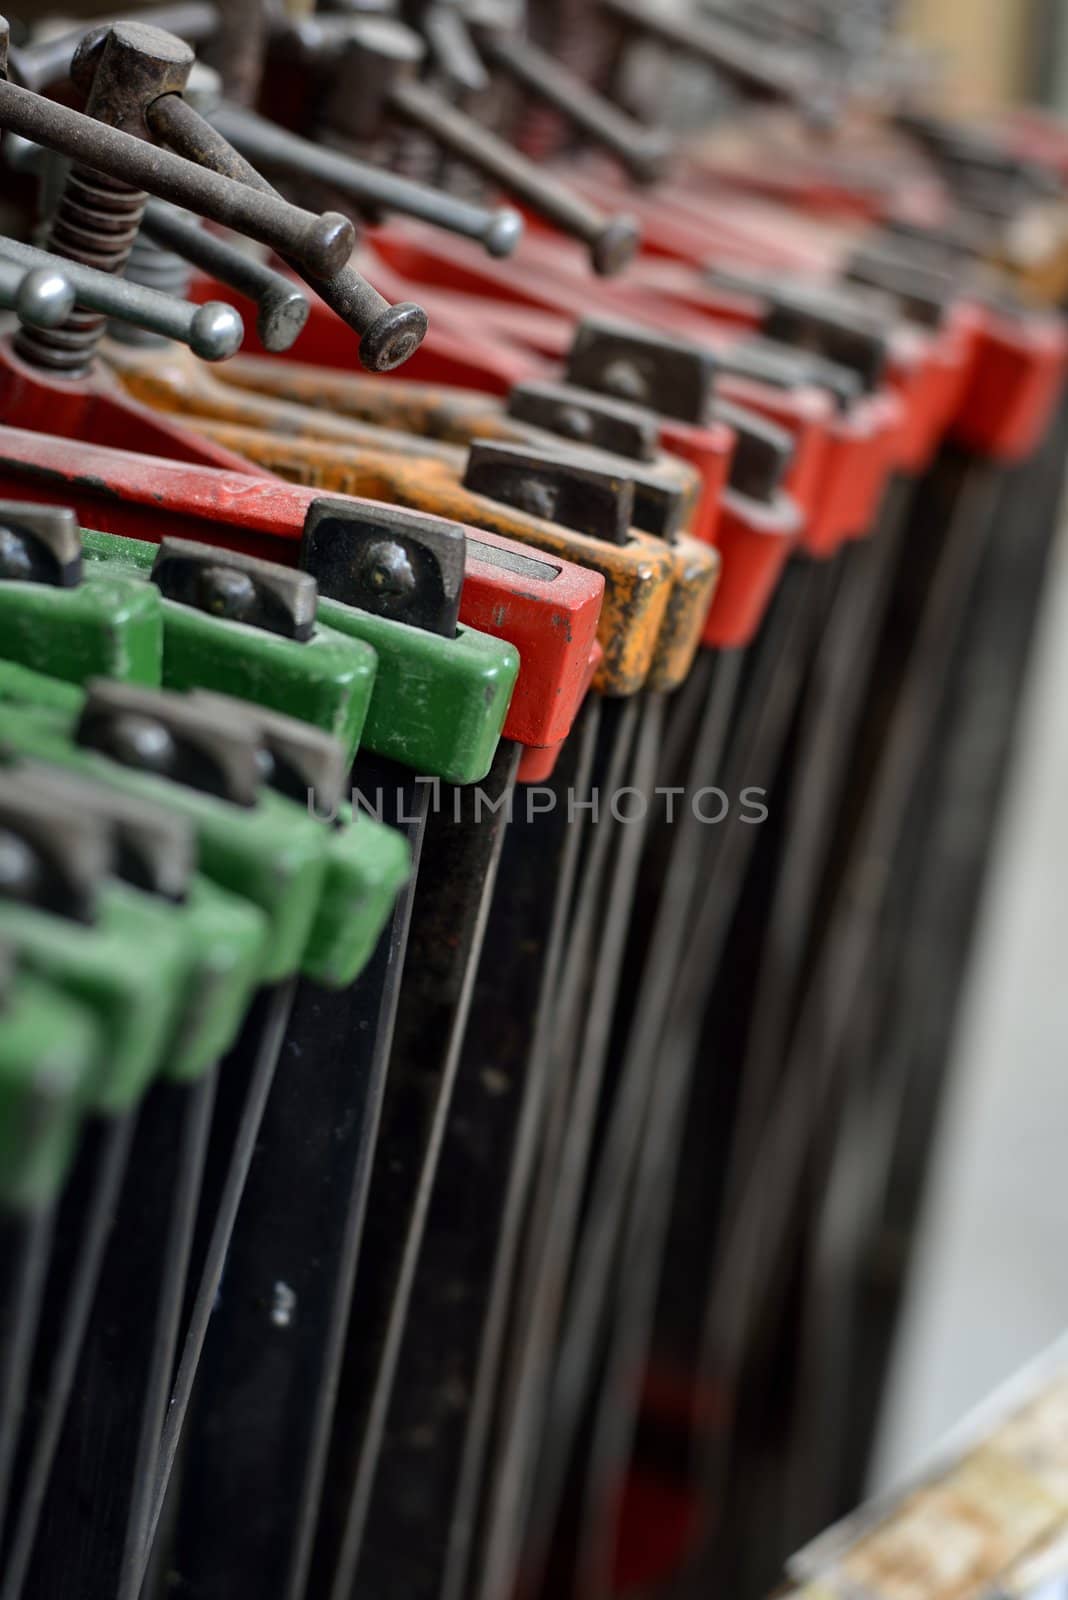 Some colored iron tools in a factory